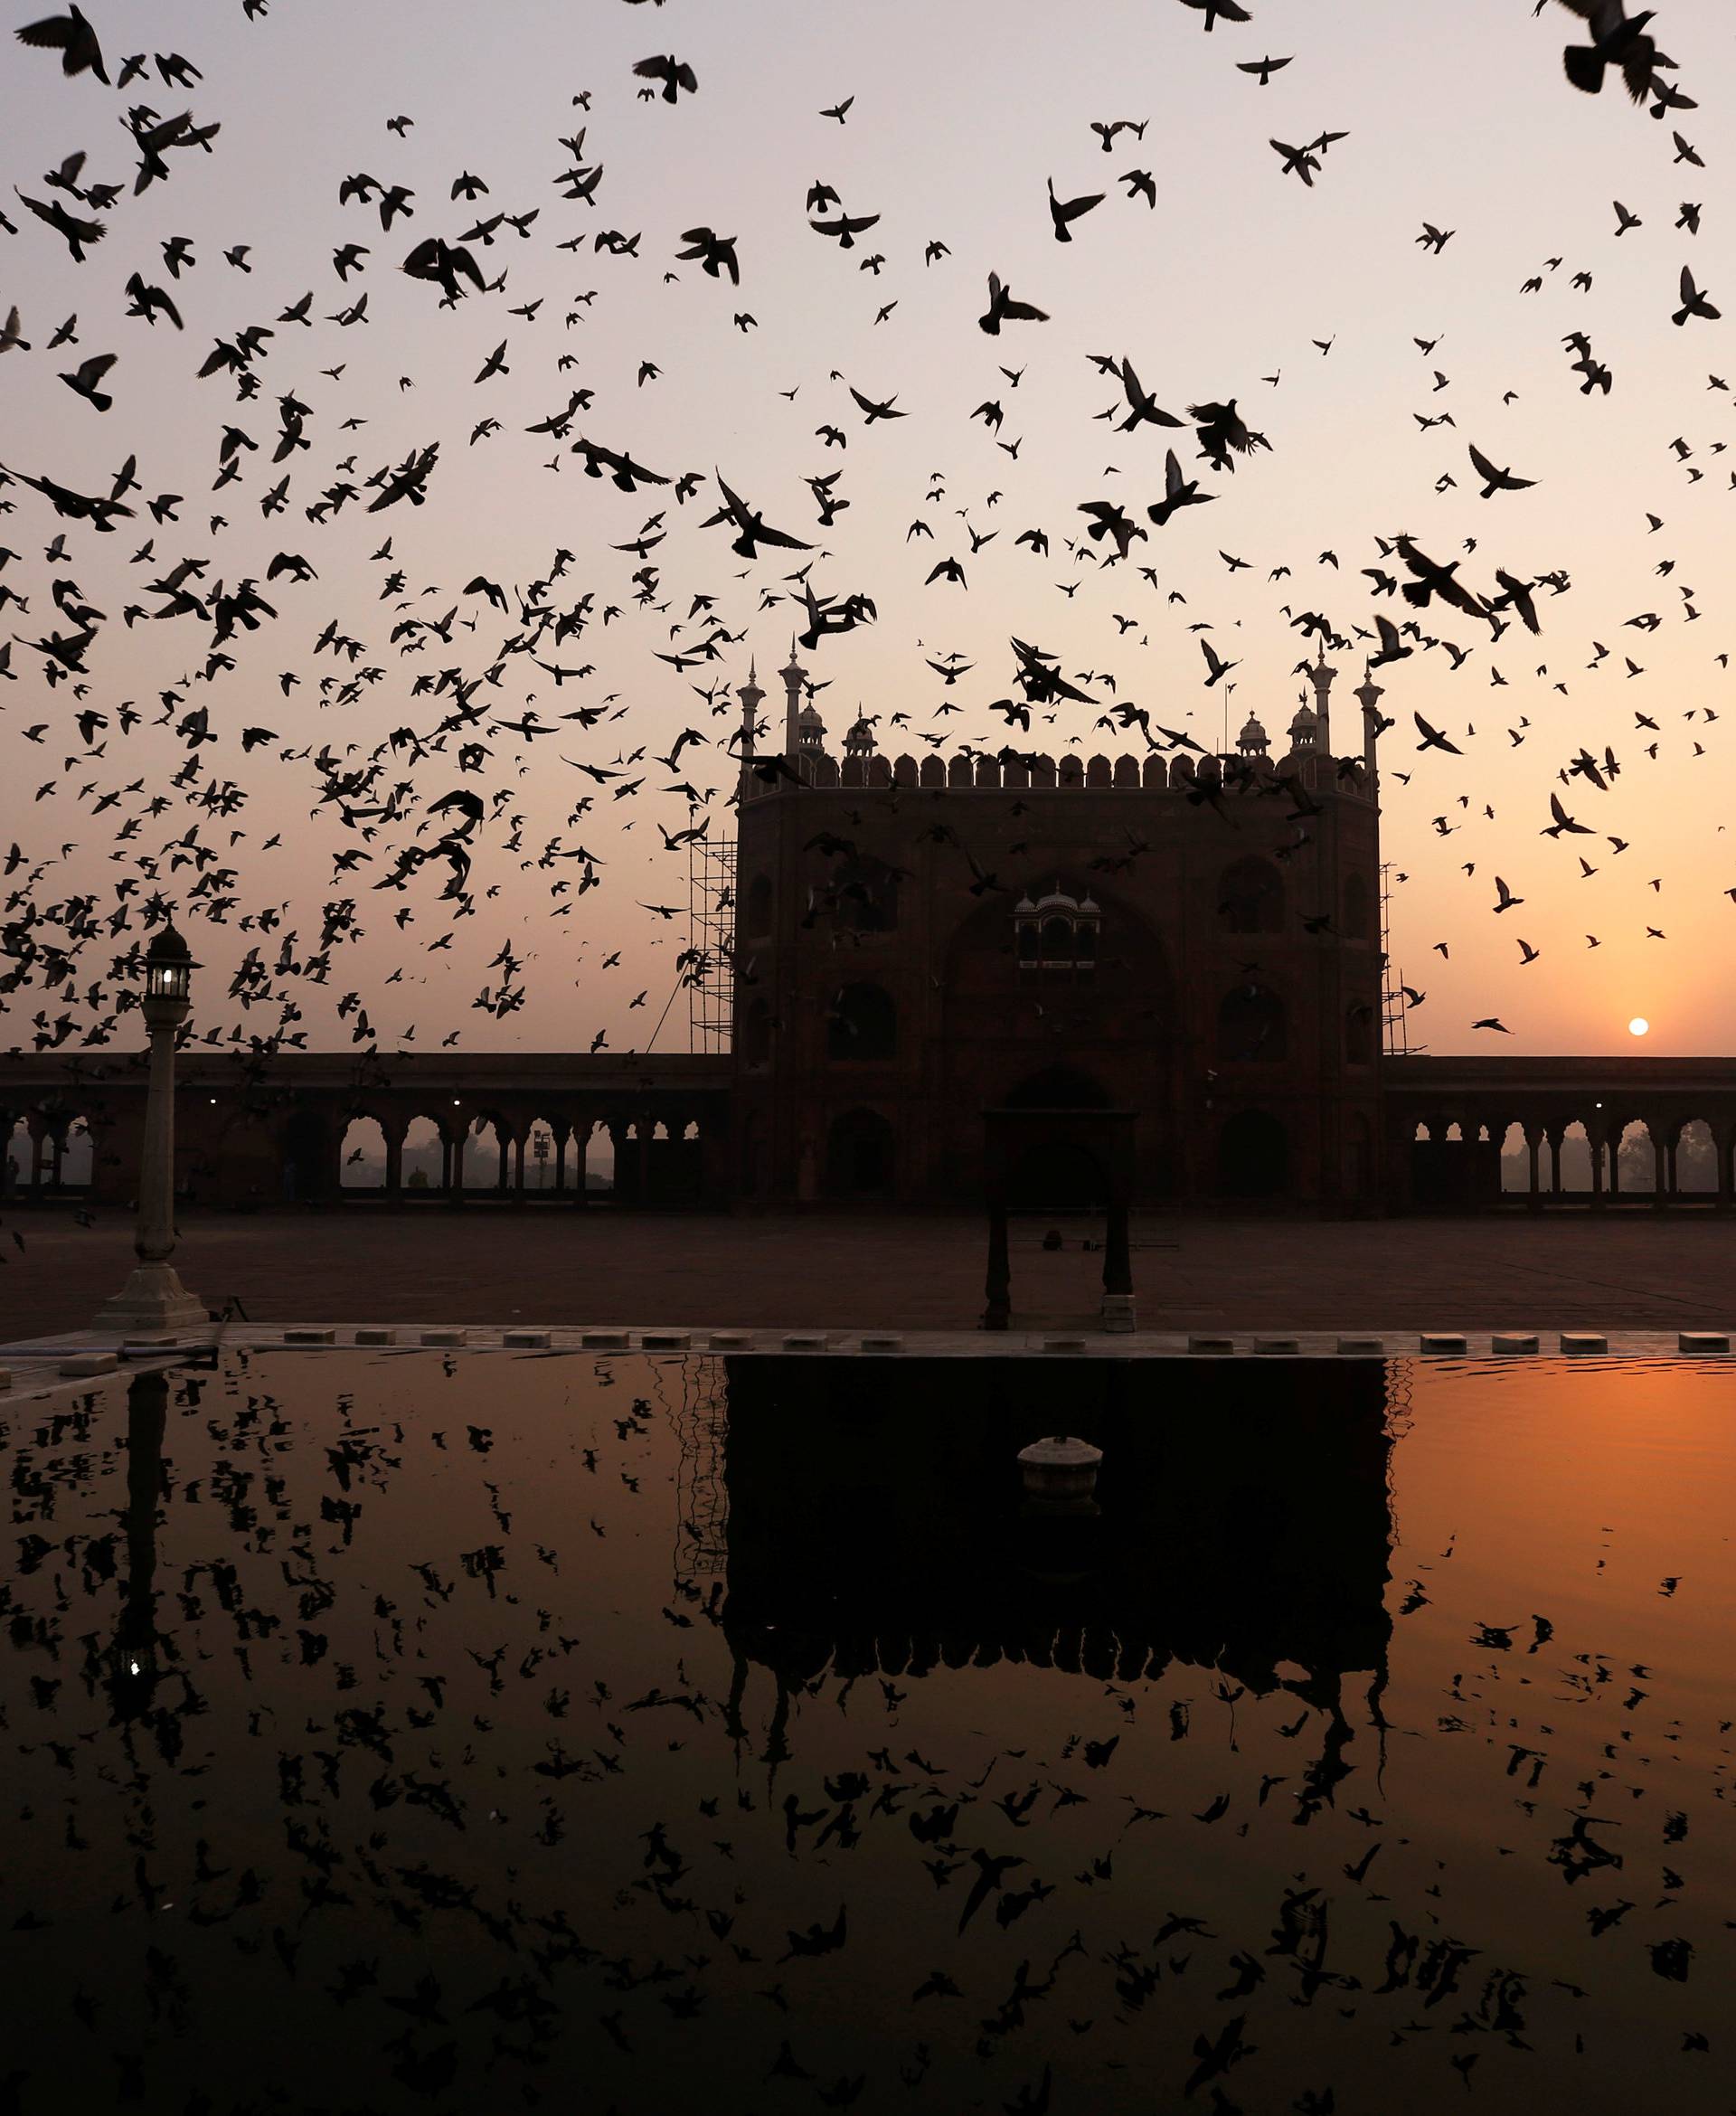 Pigeons fly inside the Jama Masjid in the old quarters of Delhi